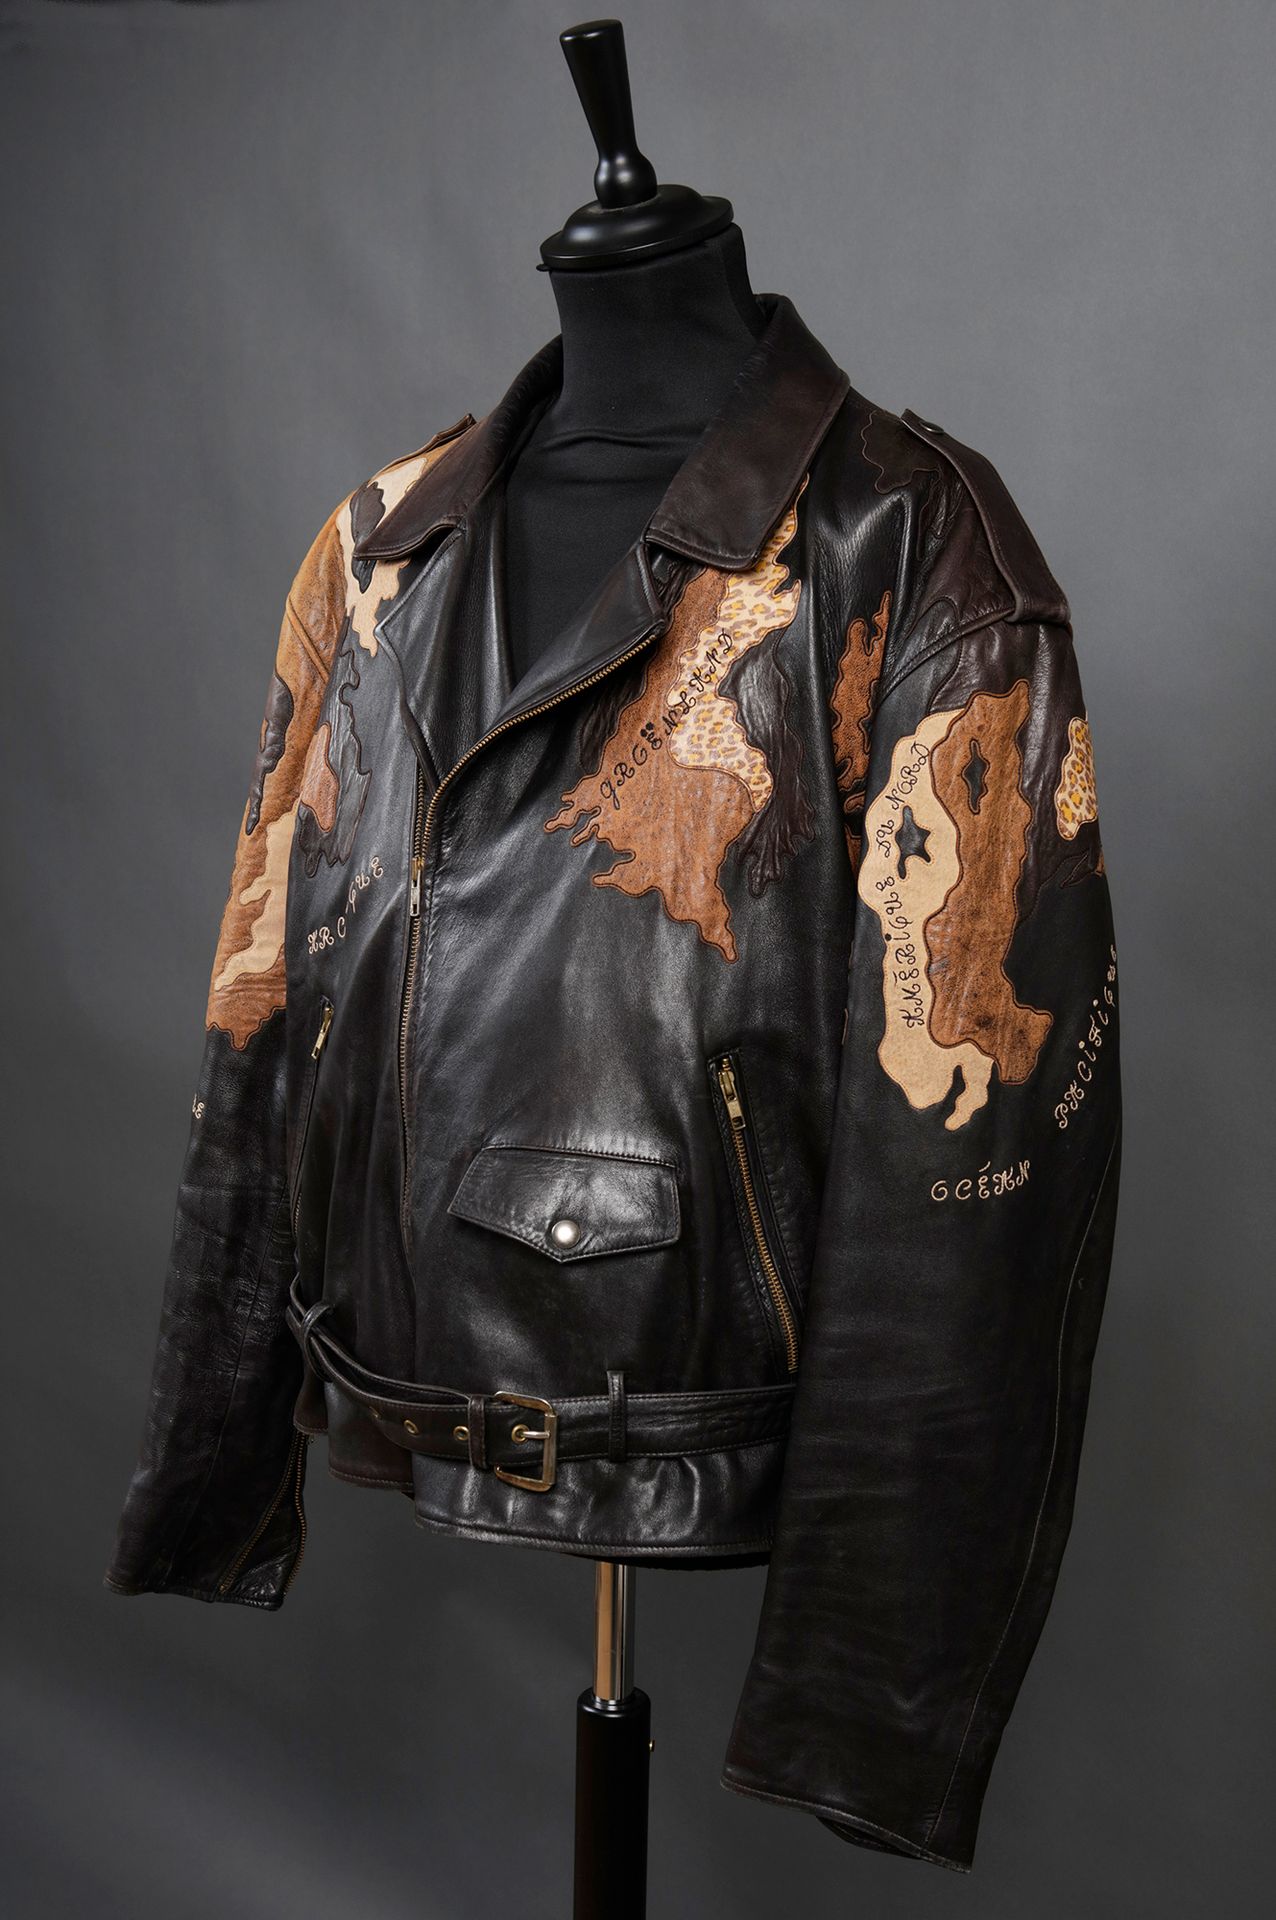 Null JOHNNY HALLYDAY
1 jacket entitled "Planet", in brown and fawn leather desig&hellip;